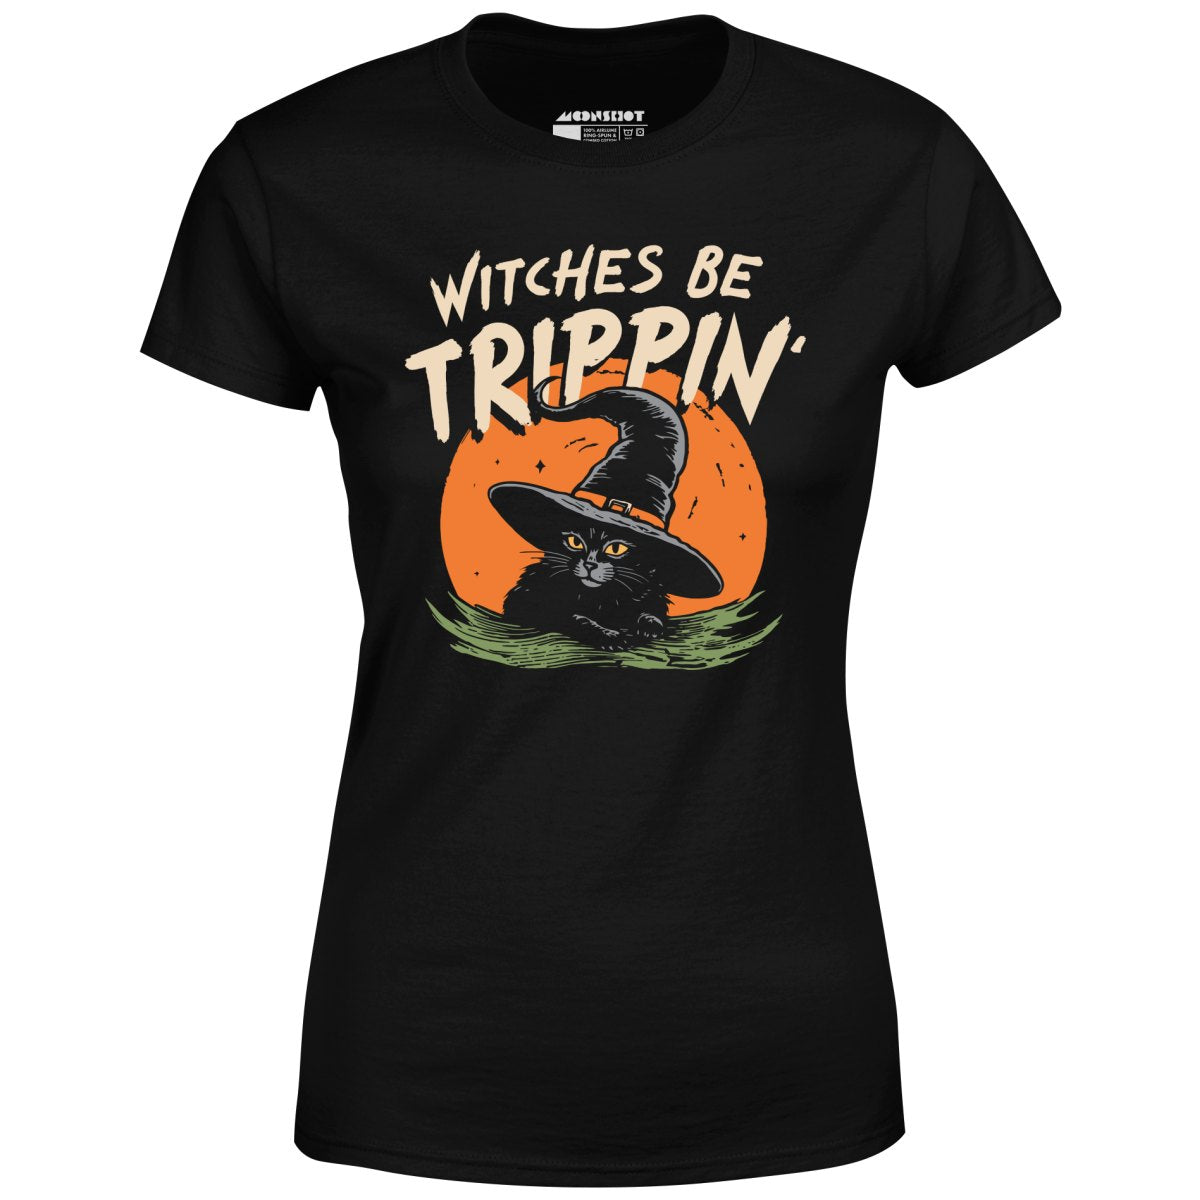 Witches Be Trippin' - Women's T-Shirt